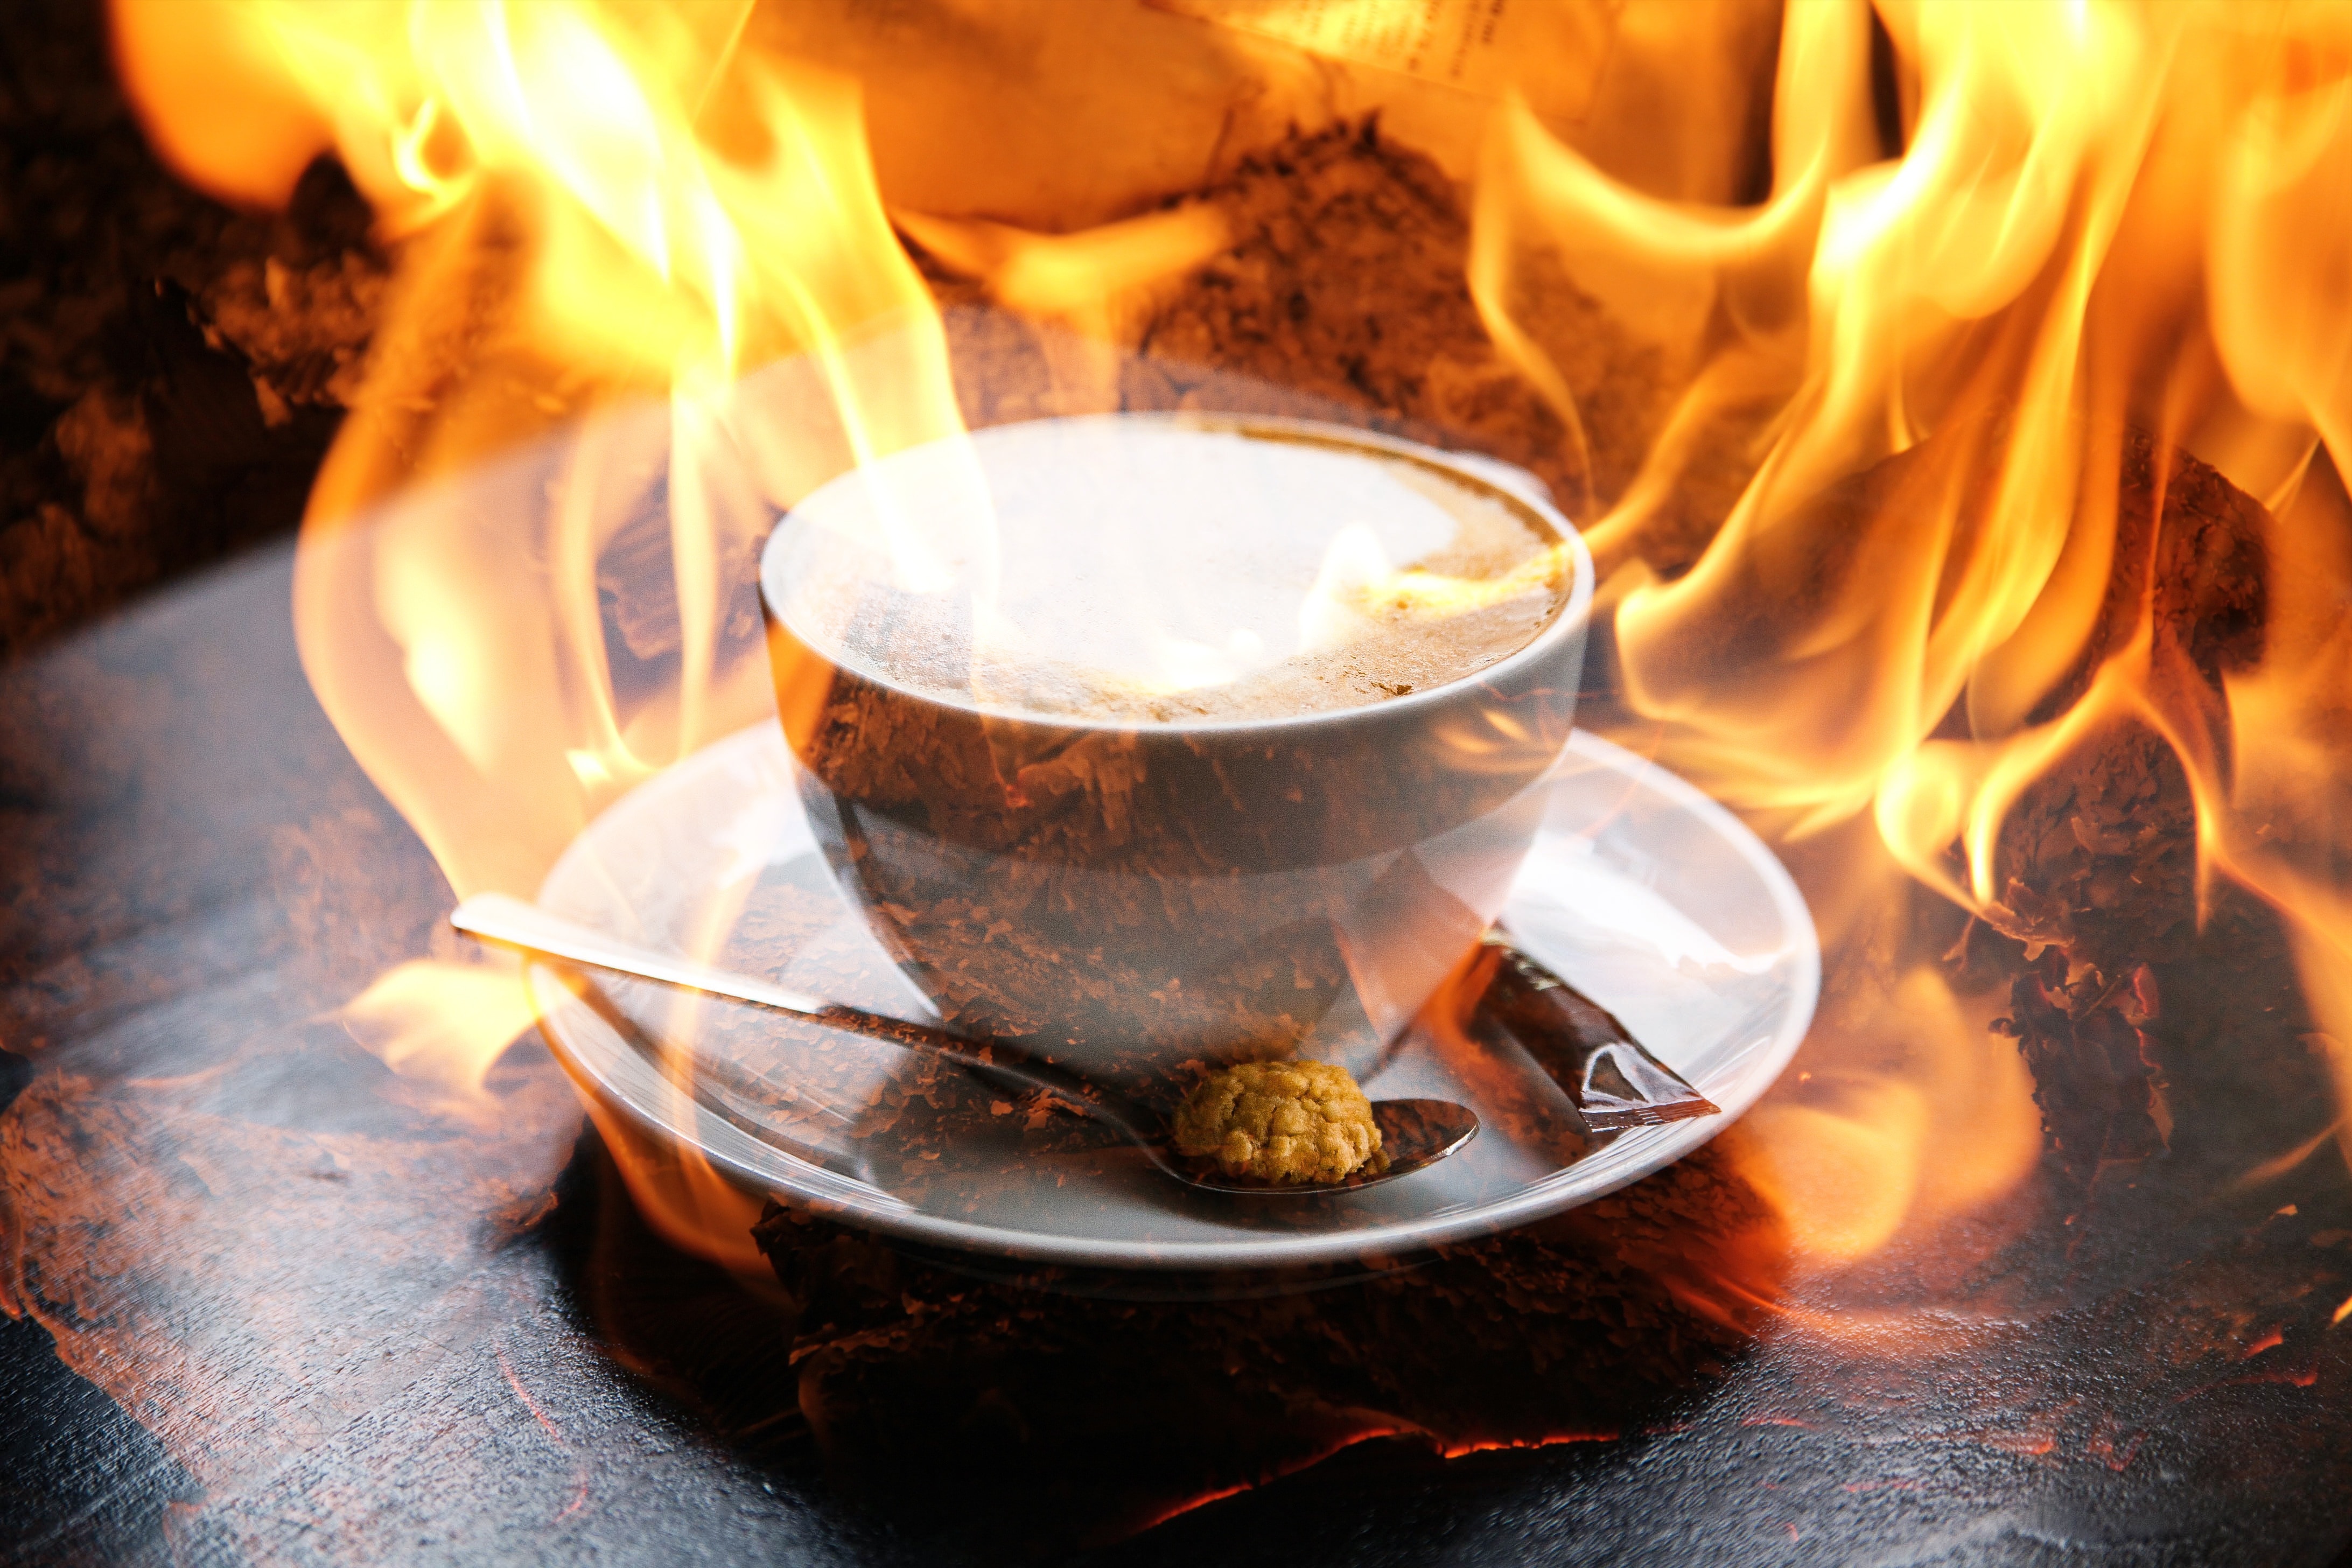 Heat, Hot Drink, Hot, Coffee, Coffee Cup, heat - temperature, flame